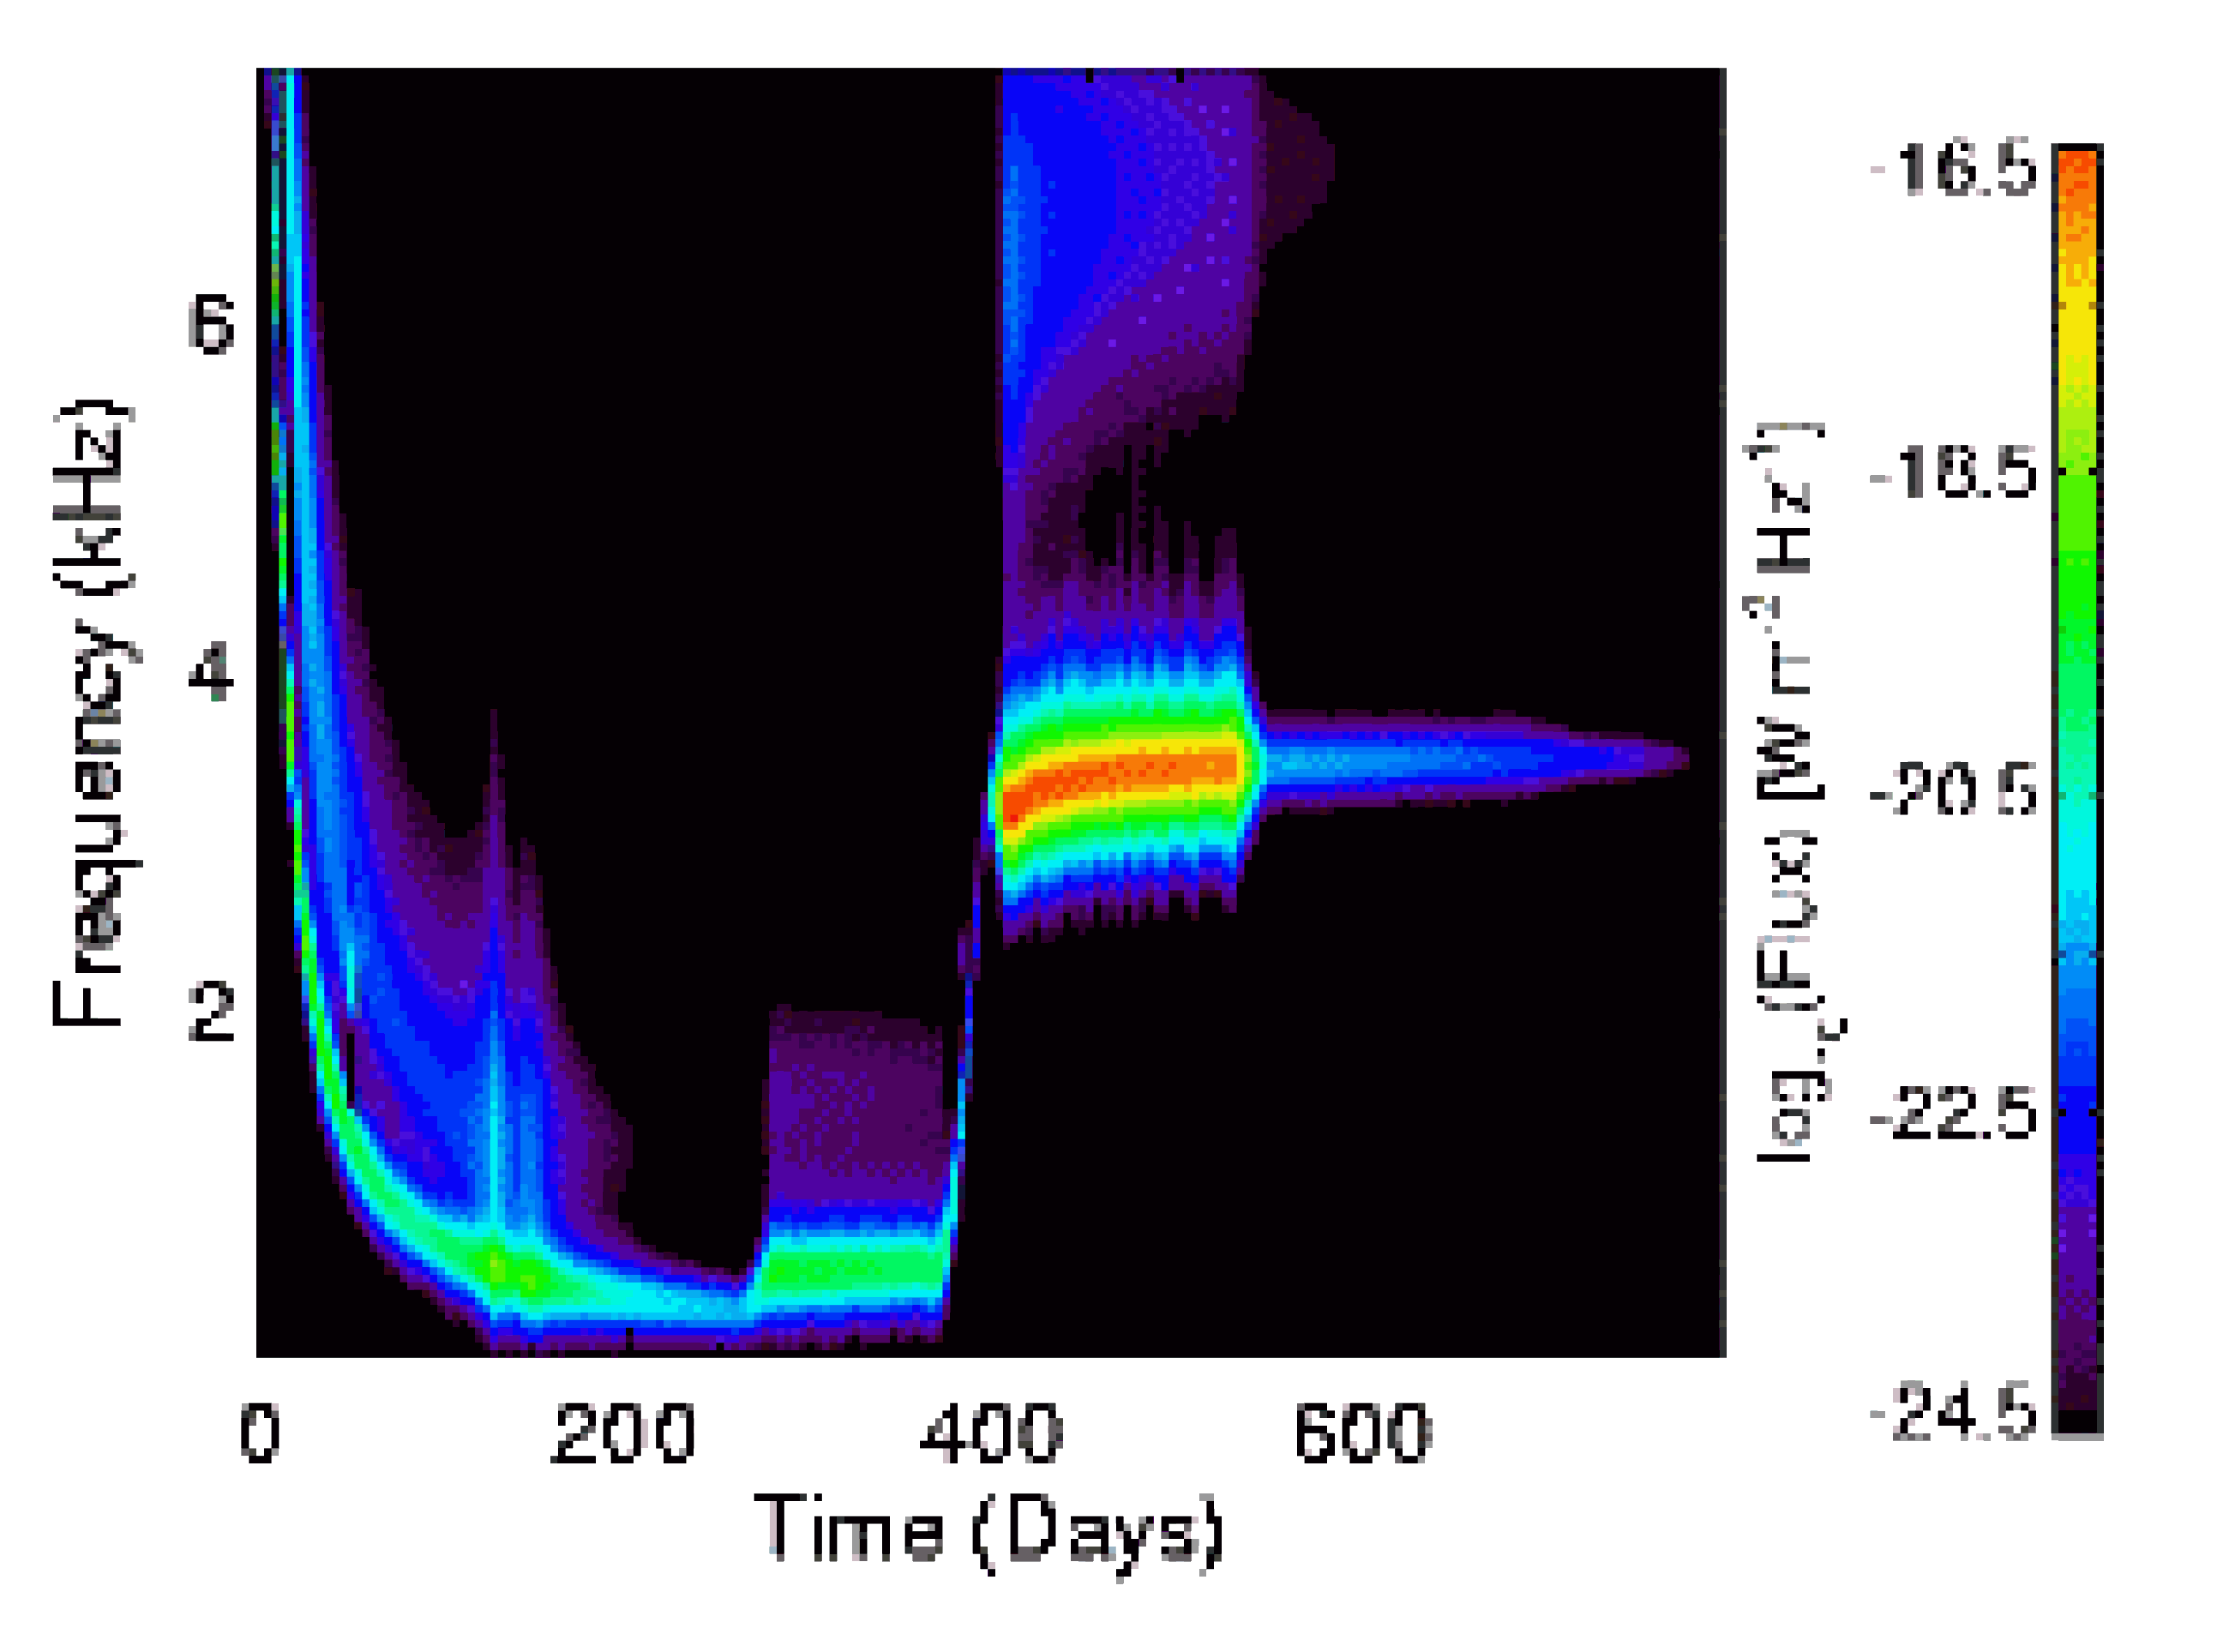 Dynamic spectra showing radio emission from the outer heliosphere due to interplanetary shocks.